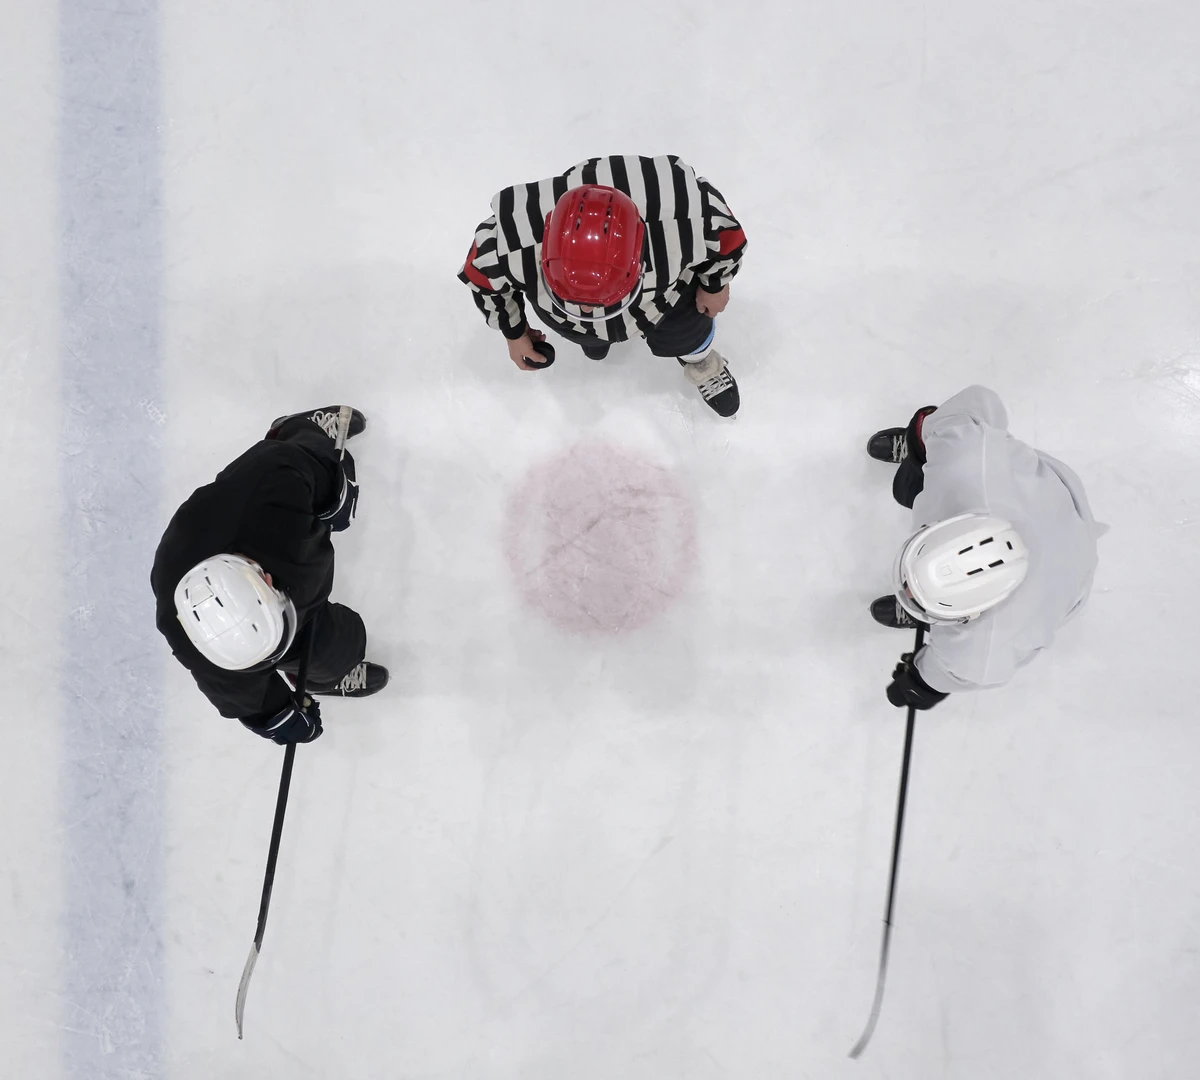 hockey face-off in the center circle